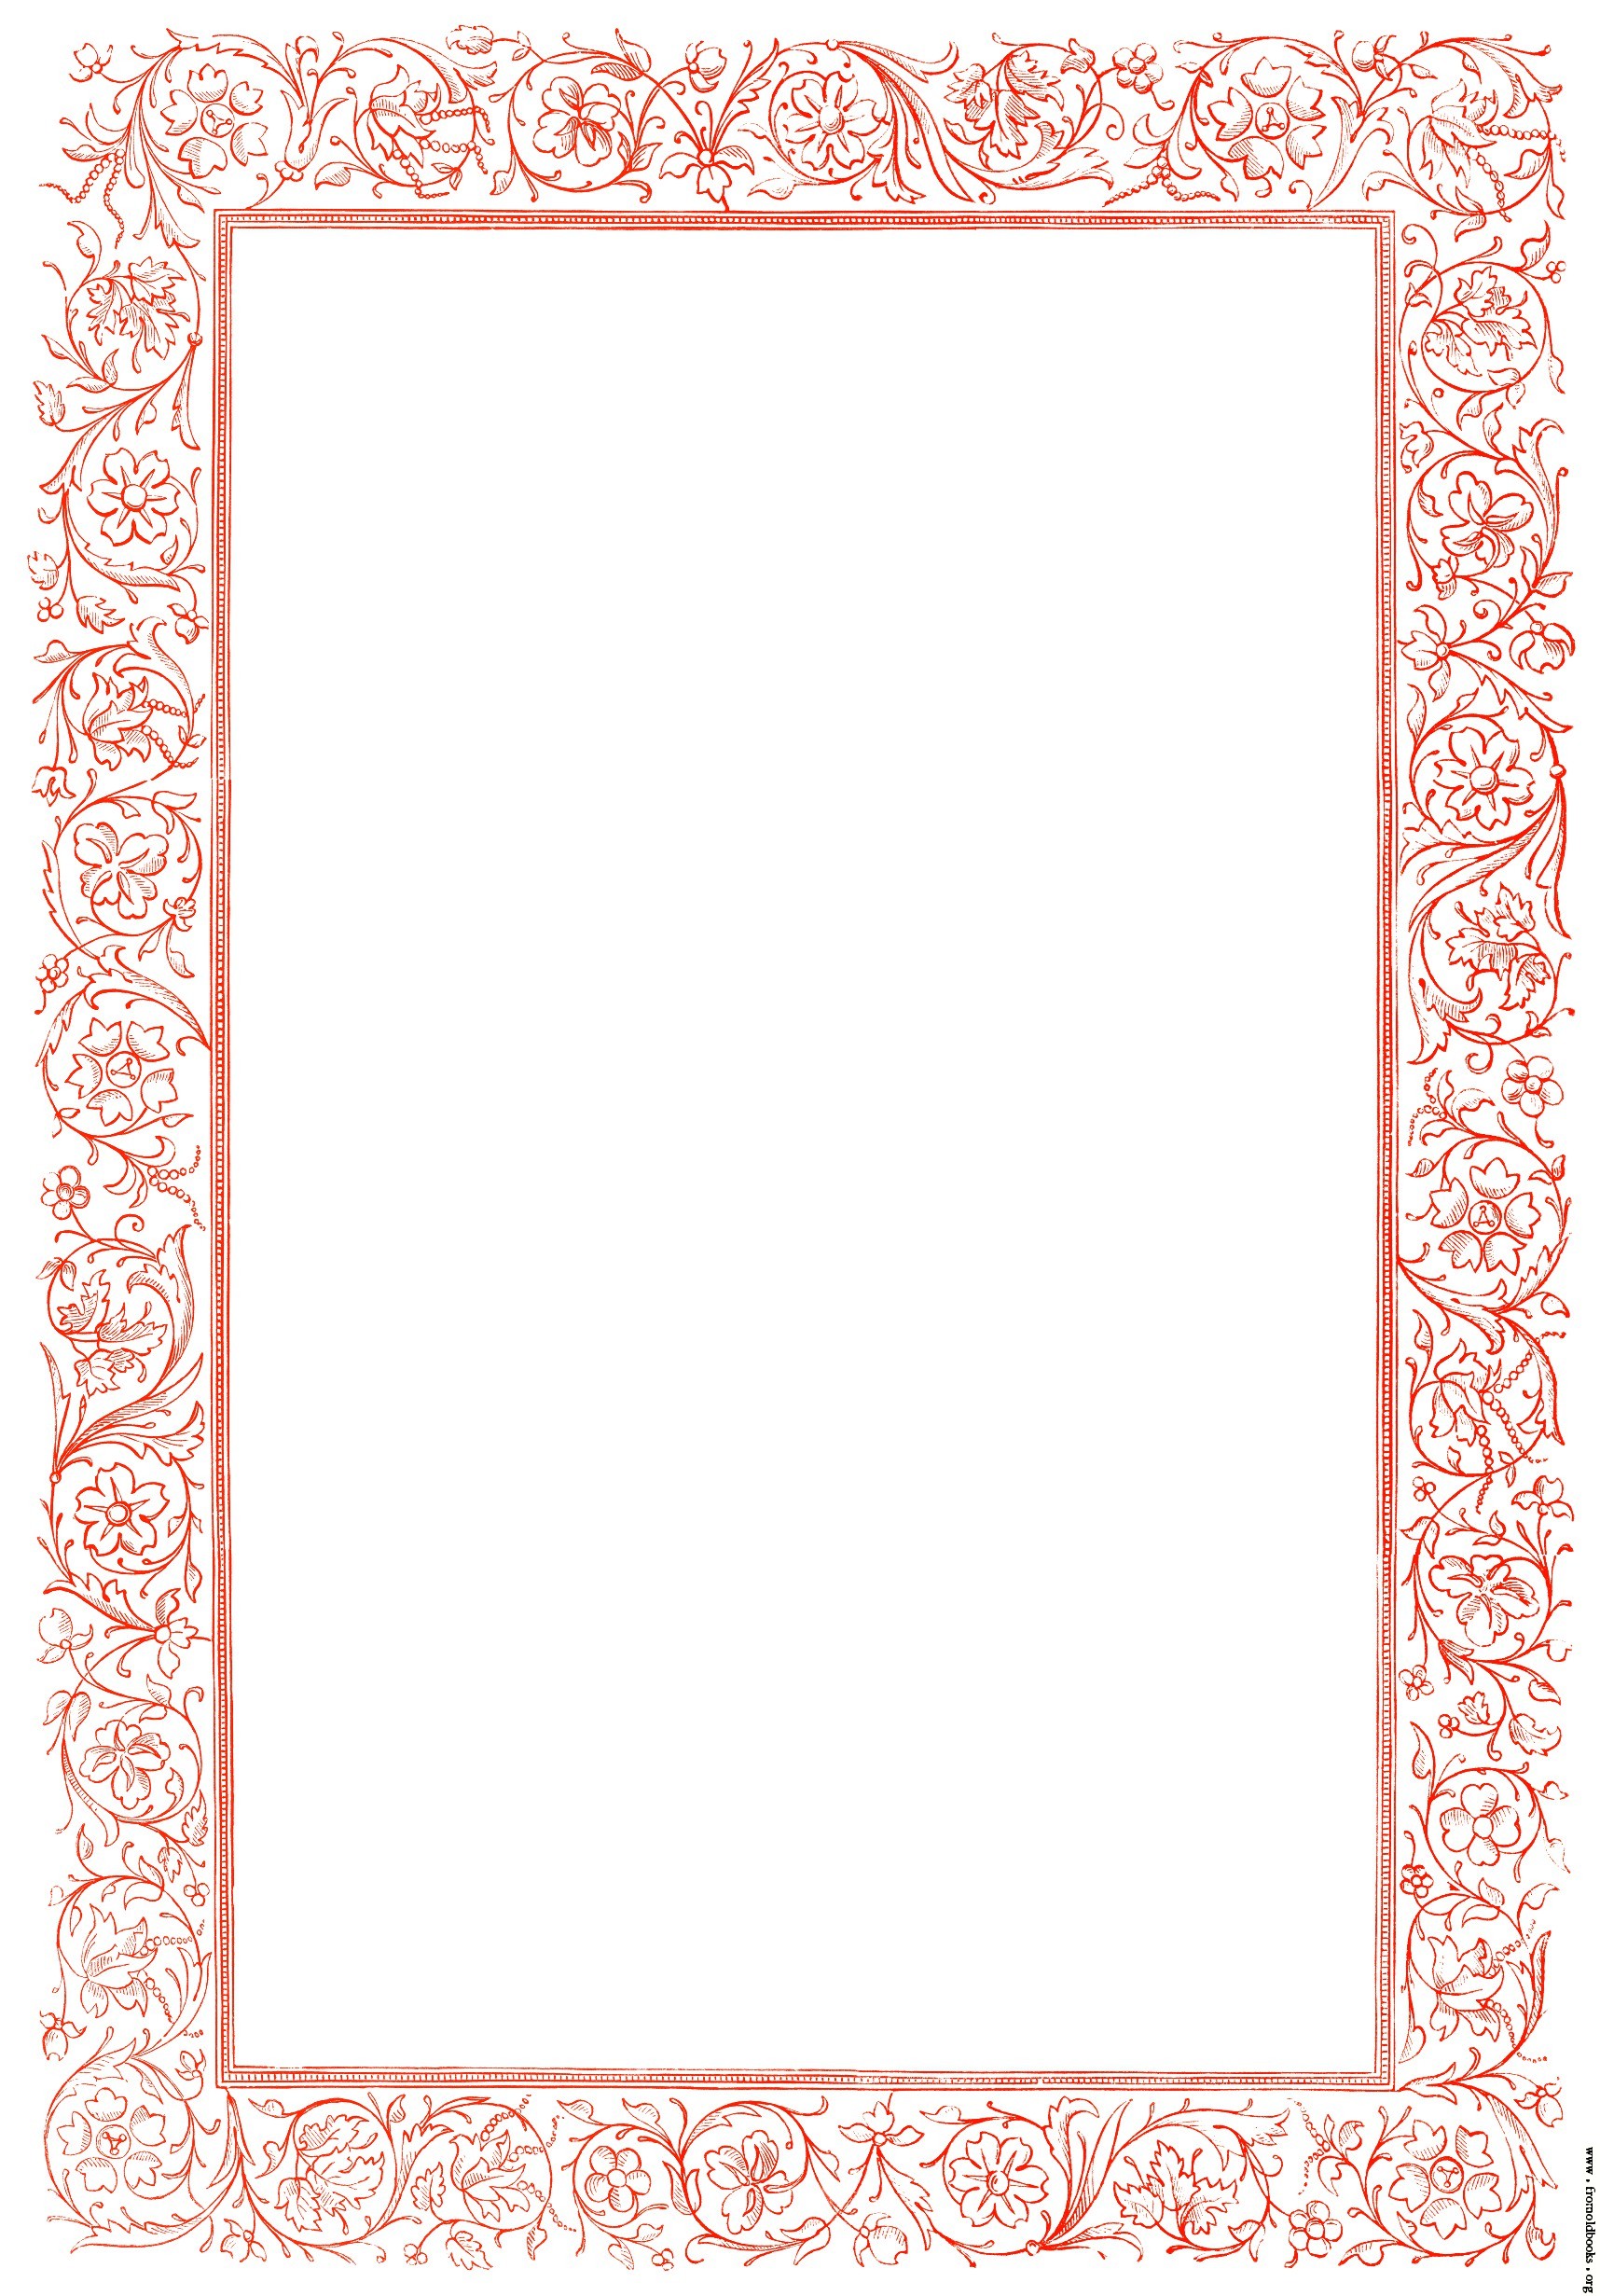 Writing Paper With Flower Borders Posted March 13 2015 By